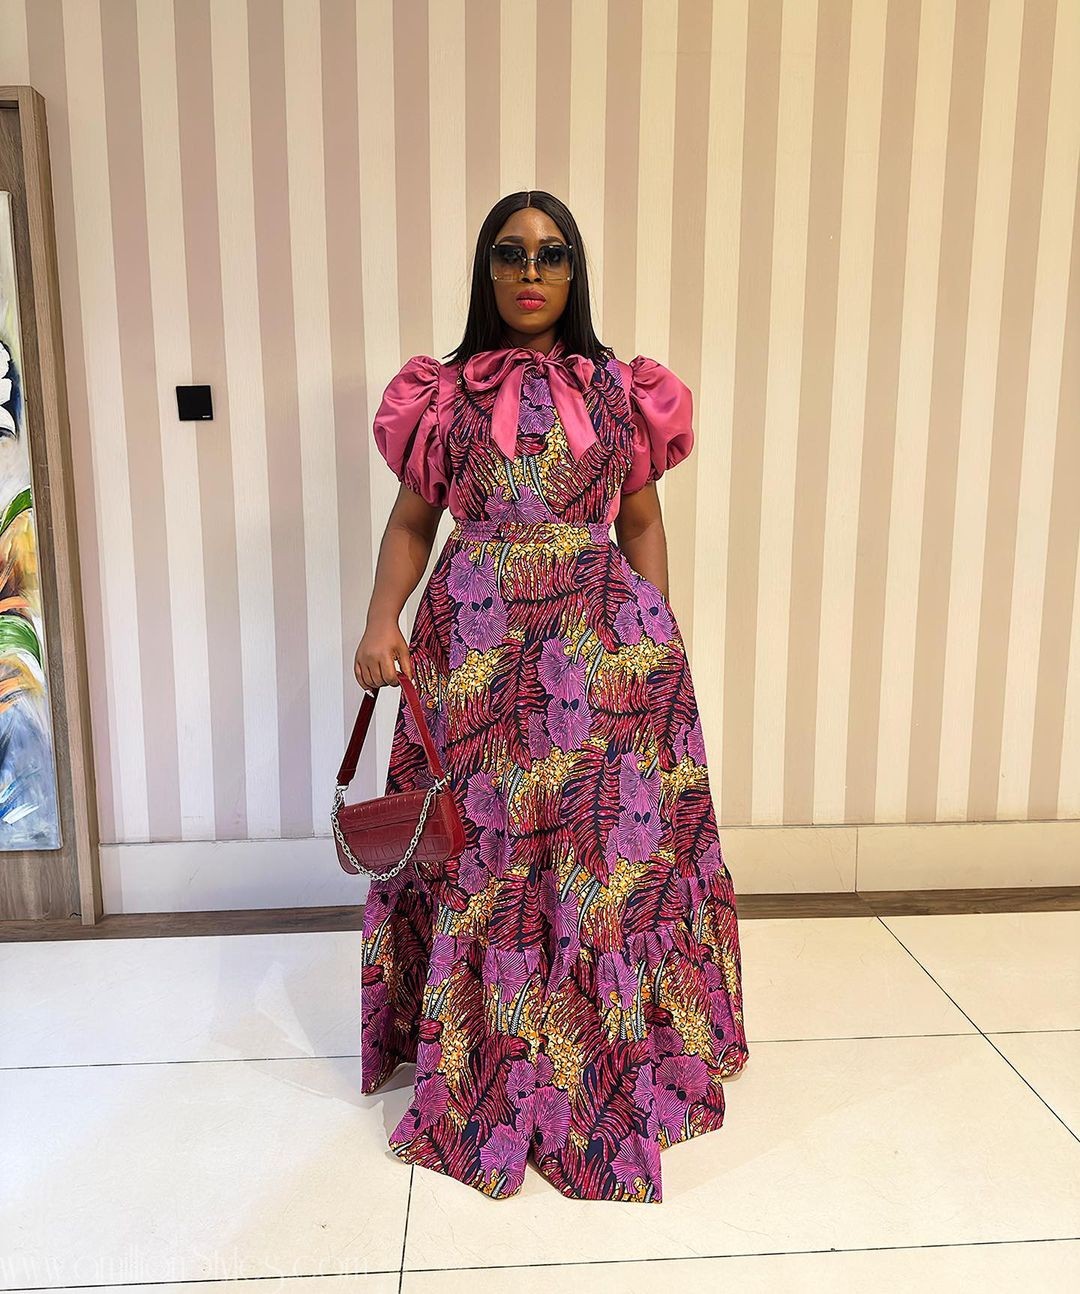 Rich Aunty Styles That Will Take Your Breath Away